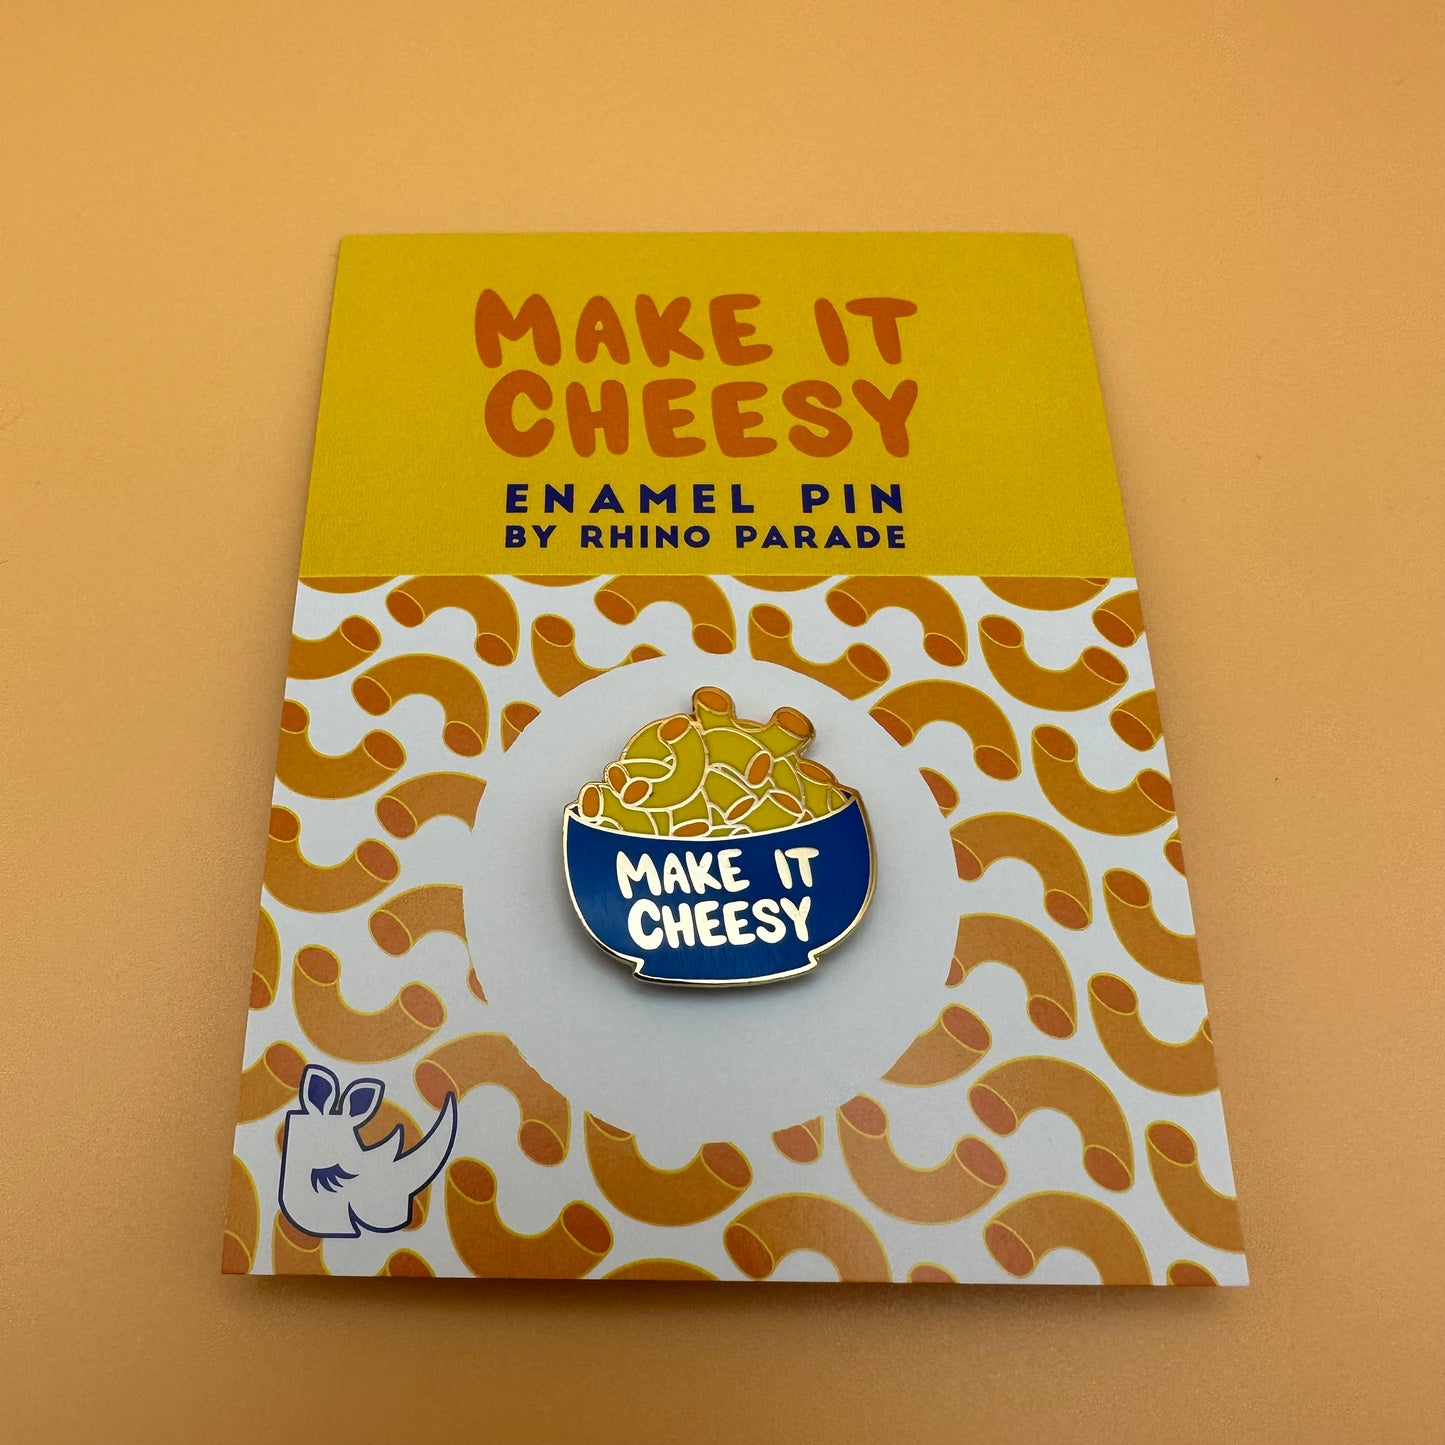 Bowl of mac and cheese enamel pin that reads "make it cheesy." On a card backing that has a patterned image of macaroni moodles.